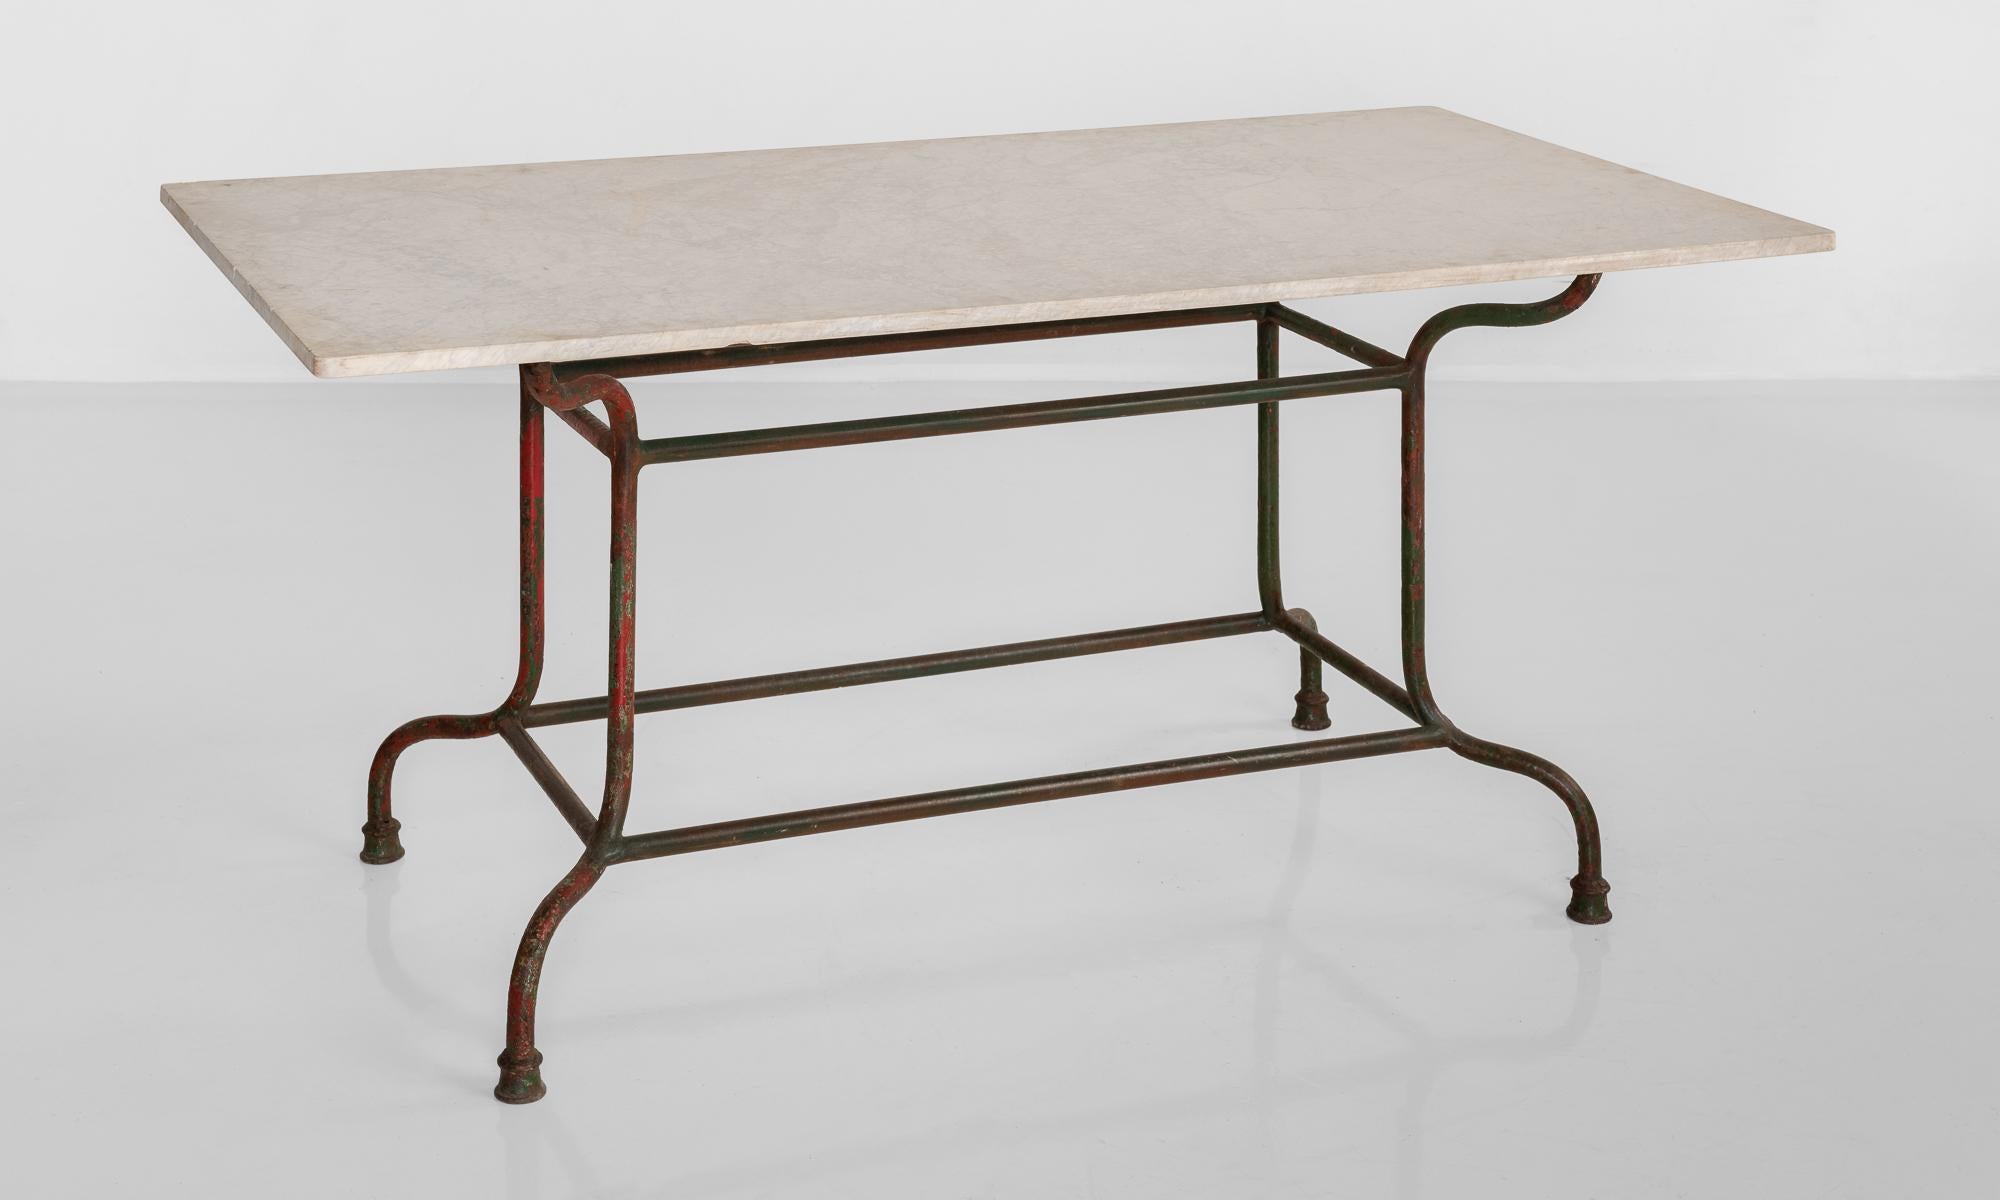 Iron & marble table, France, circa 1920.

Beautiful slab marble top on Iron base with original red paint.